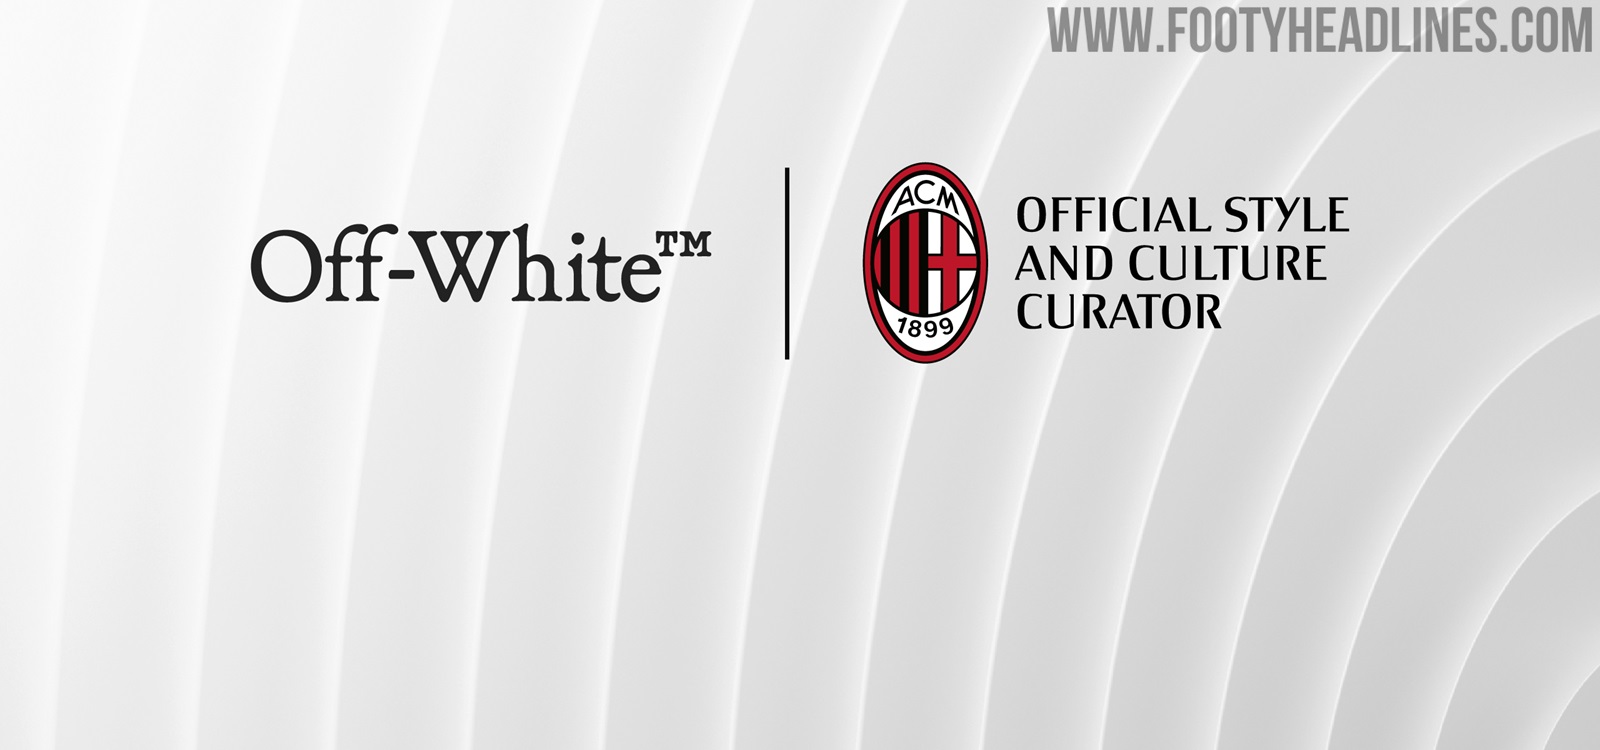 It's Official: An Off-White x AC Milan Collaboration is Coming